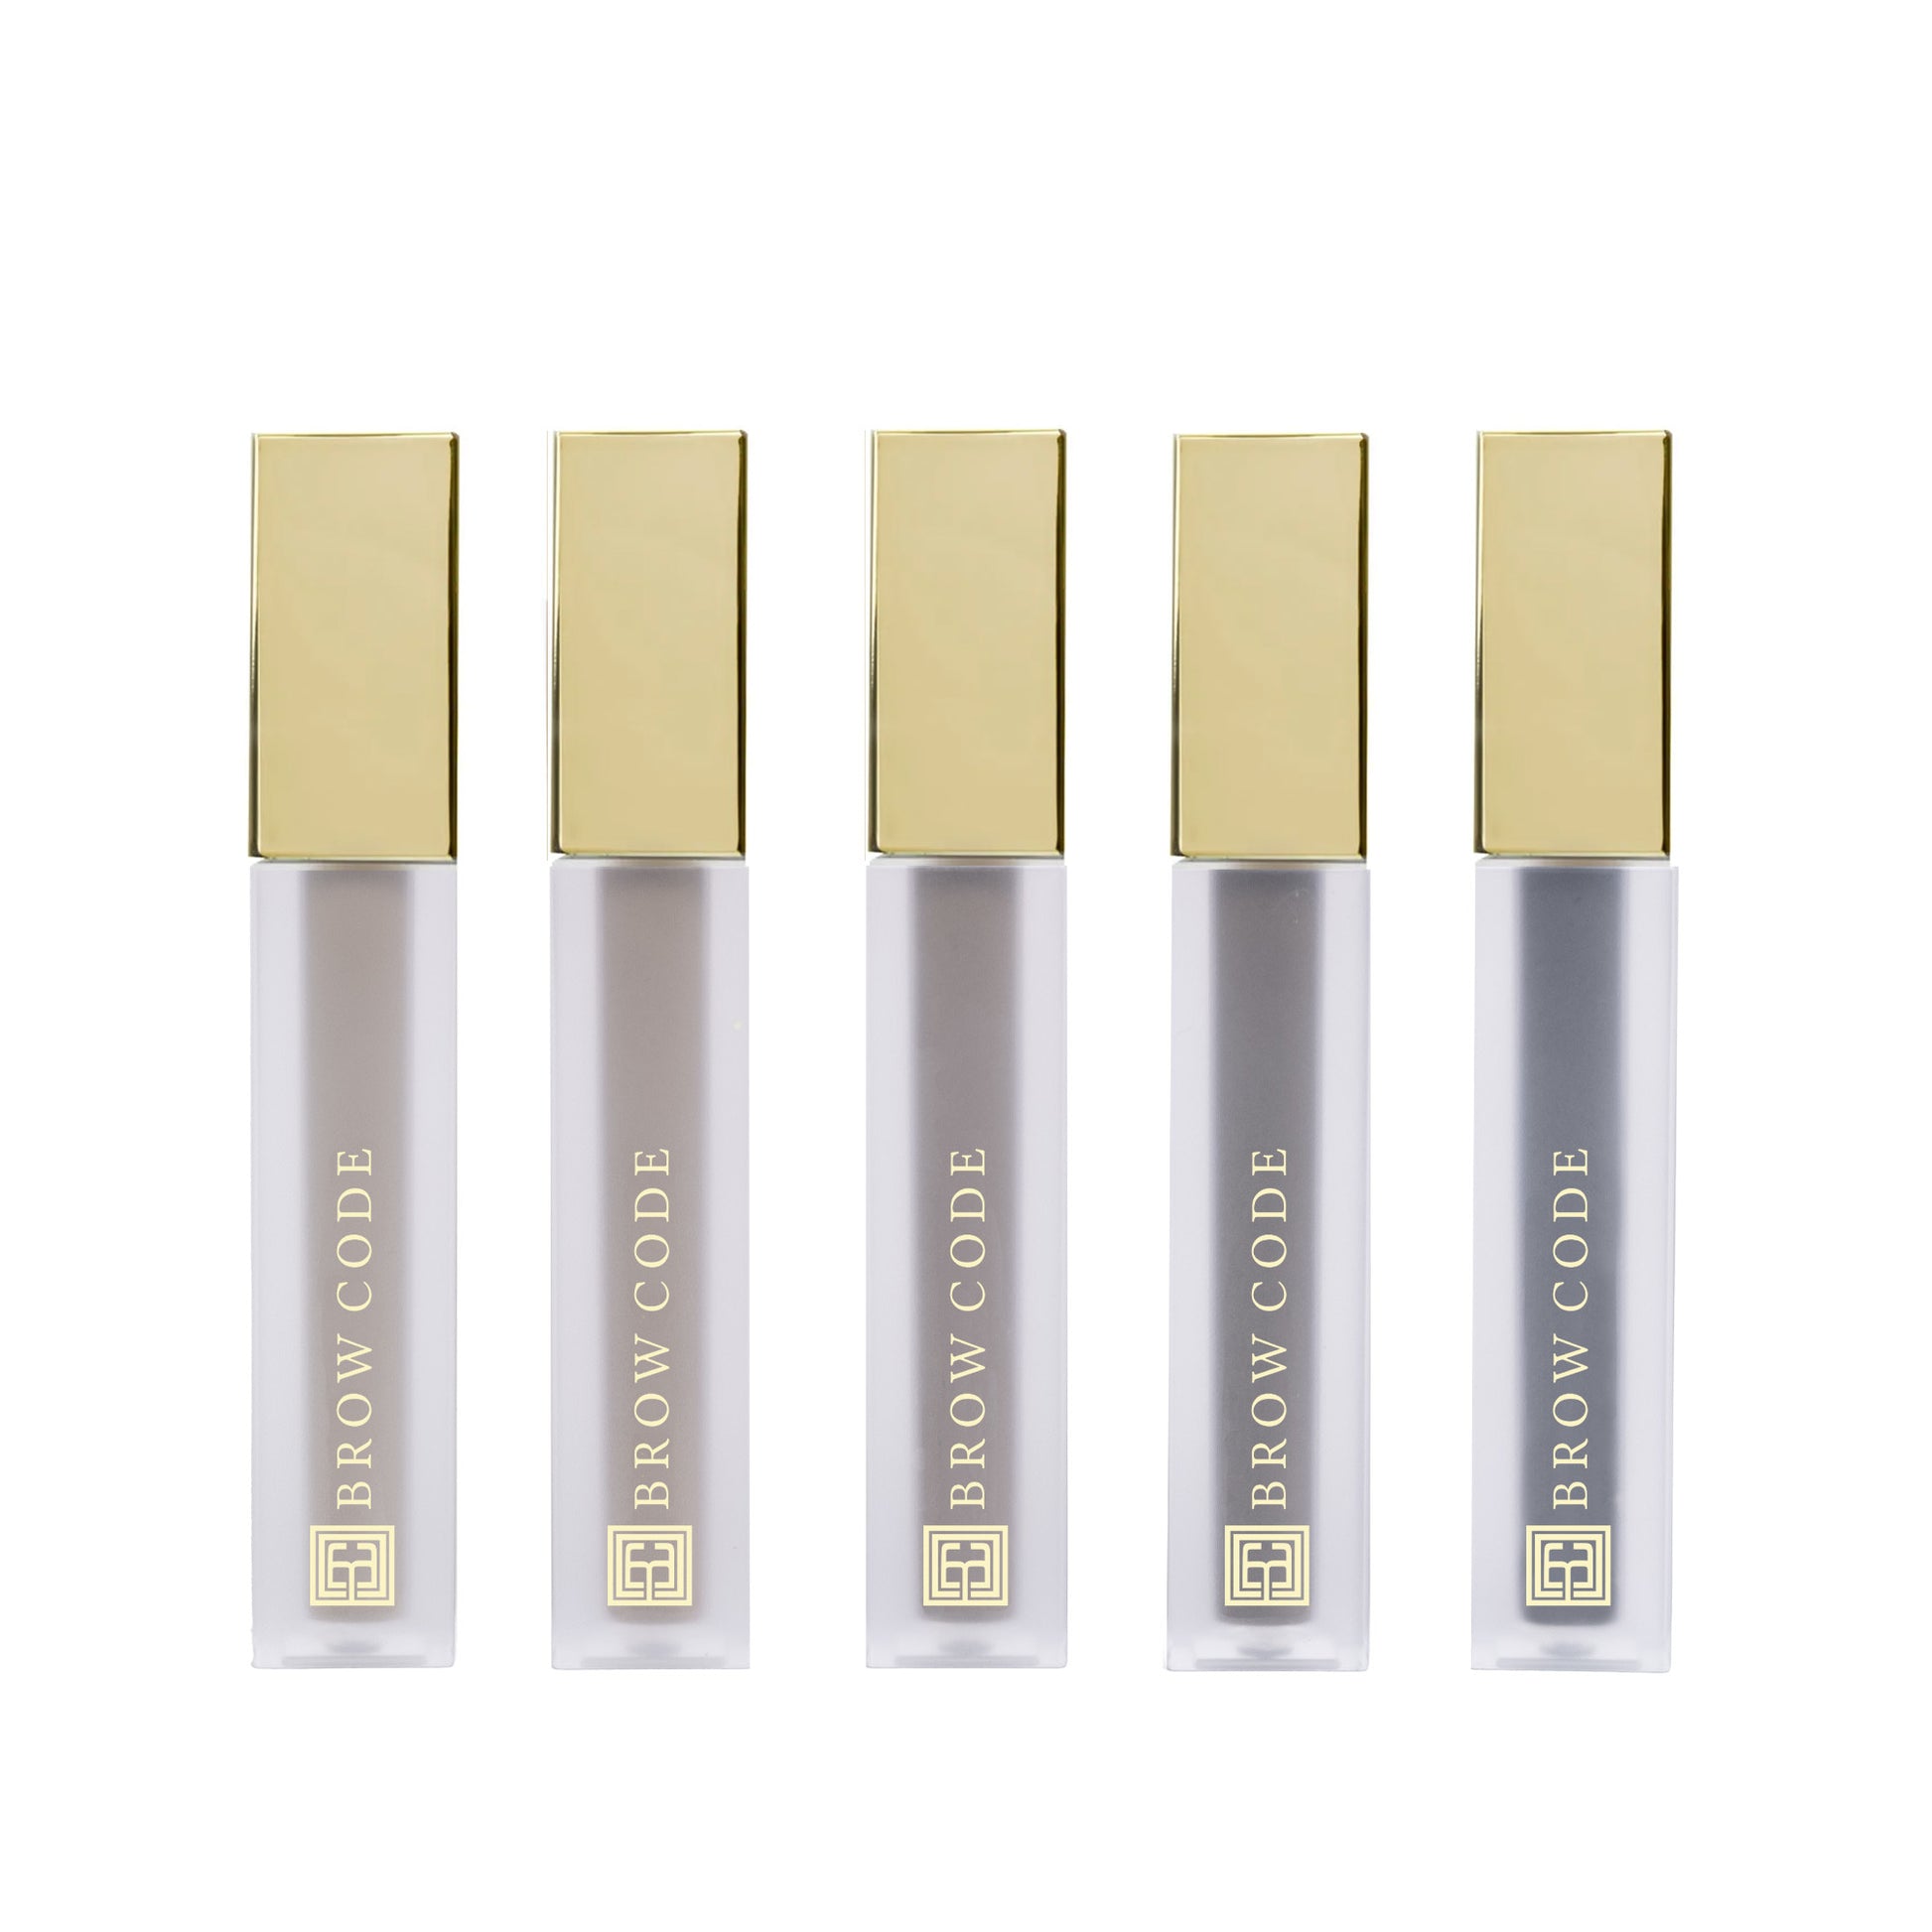 Tinted Multi-Peptide Brow Gel vials against a white background